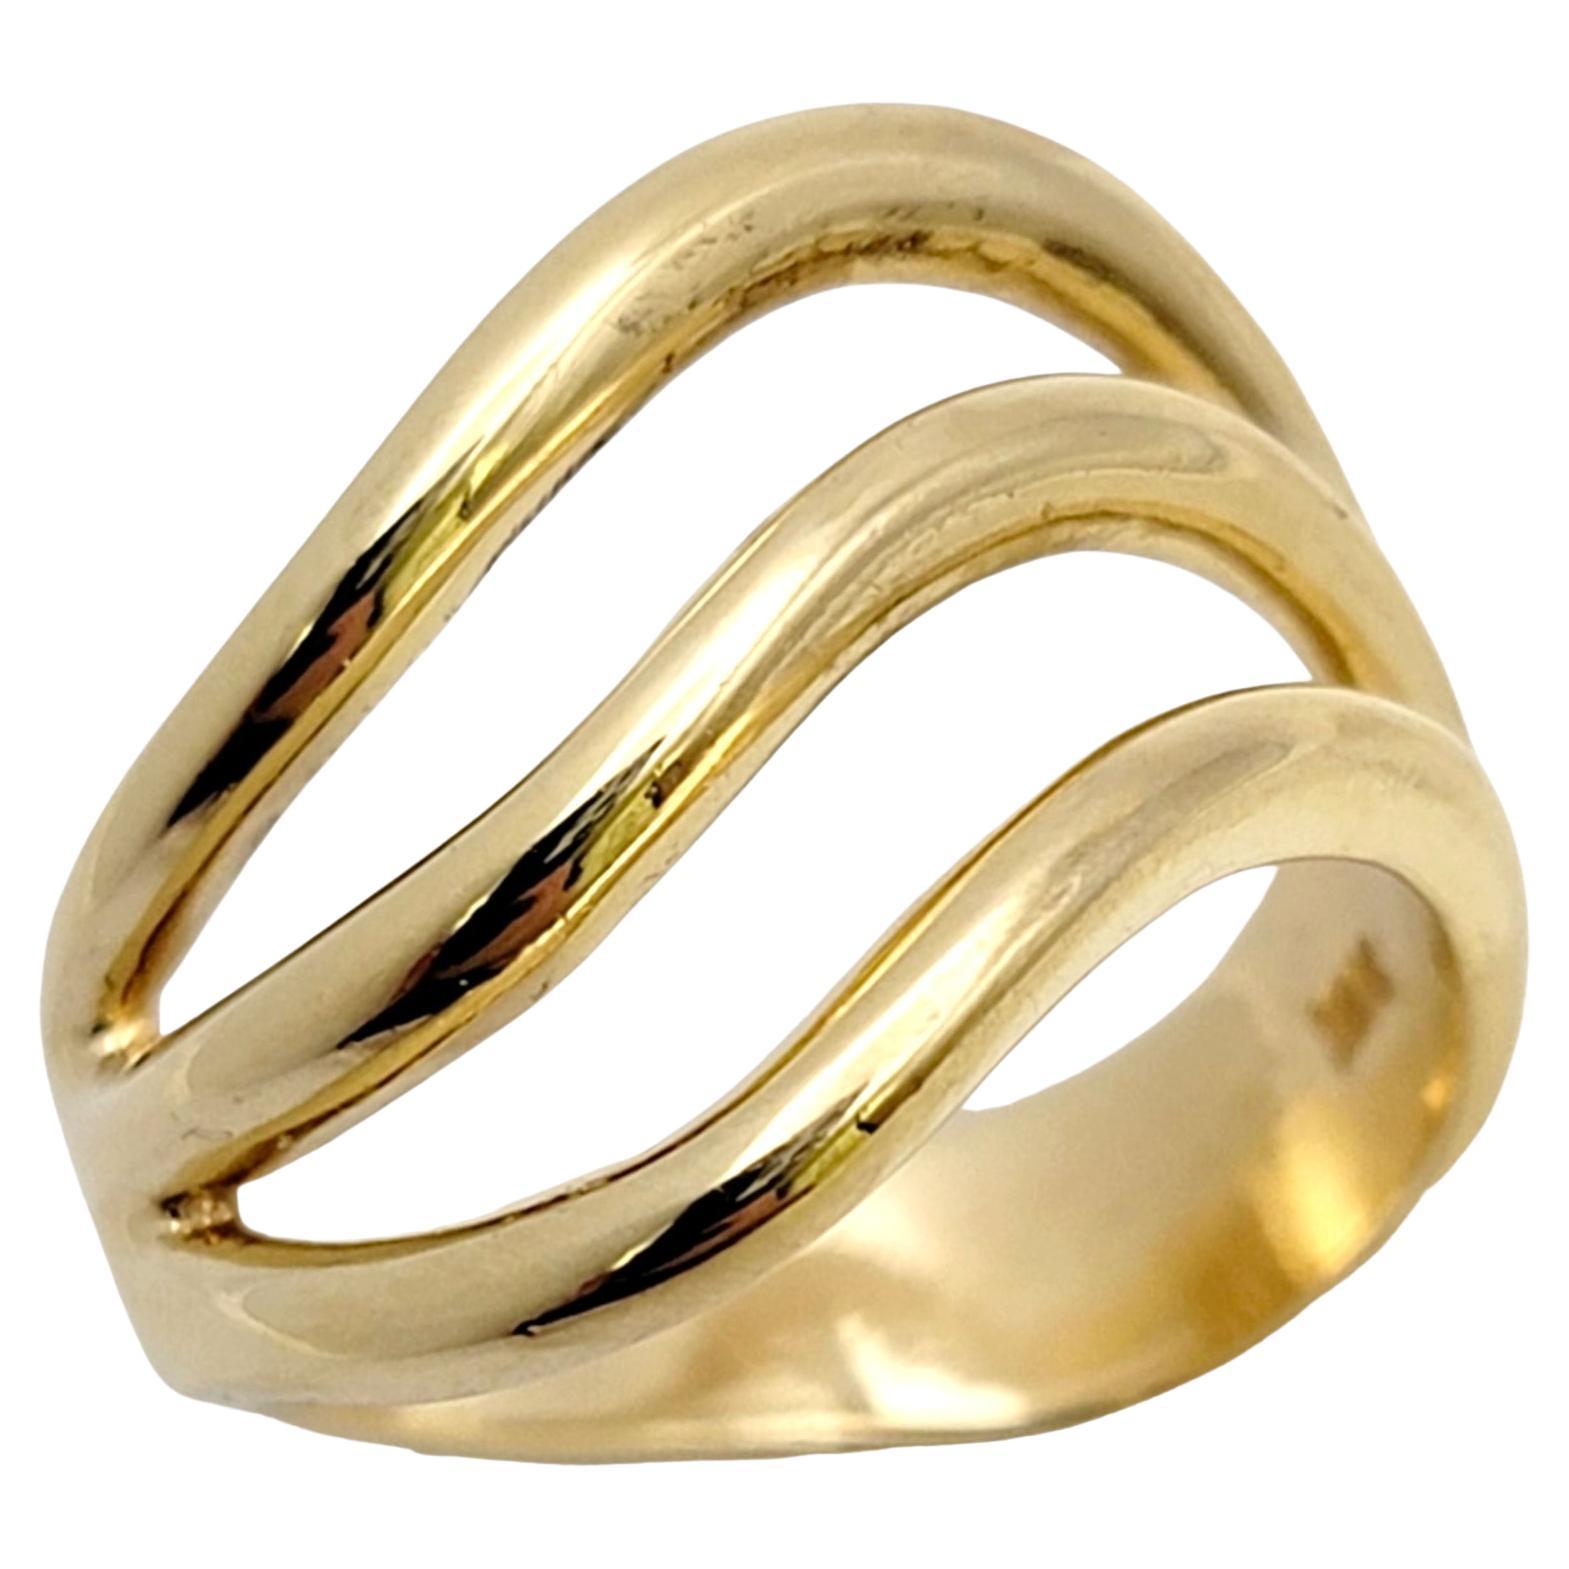 Ring size: 7.25

Simple yet stunning 18 karat yellow gold band ring by Native American jeweler Harvey Begay. This unique contoured piece gives off a stylish, modern vibe while gently hugging the finger. You will adore this ring! 

The elegant band